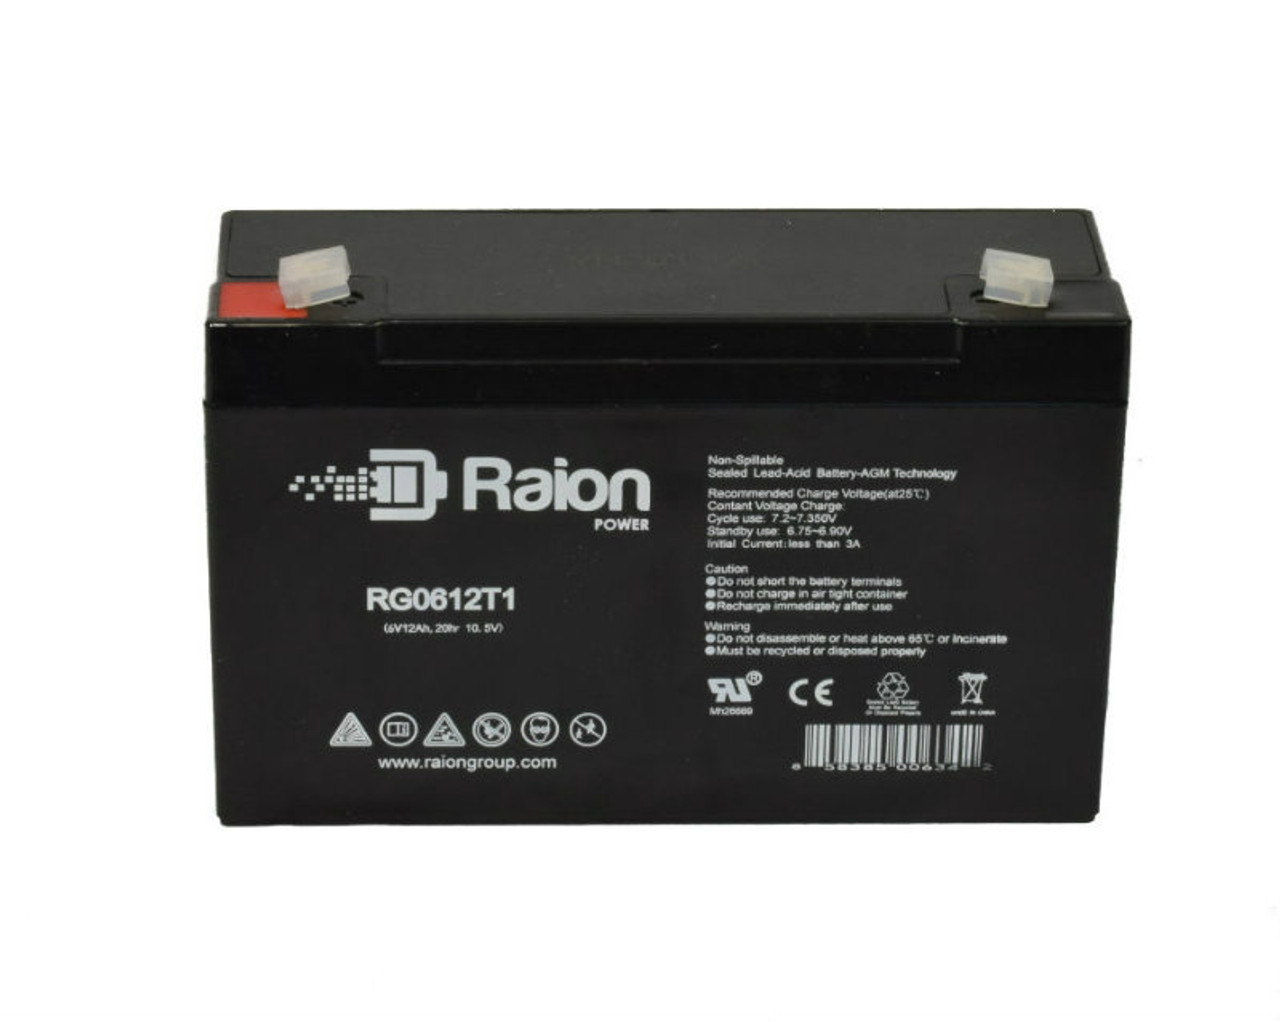 Raion Power RG06120T1 Replacement Battery Cartridge for HP Compaq R3000